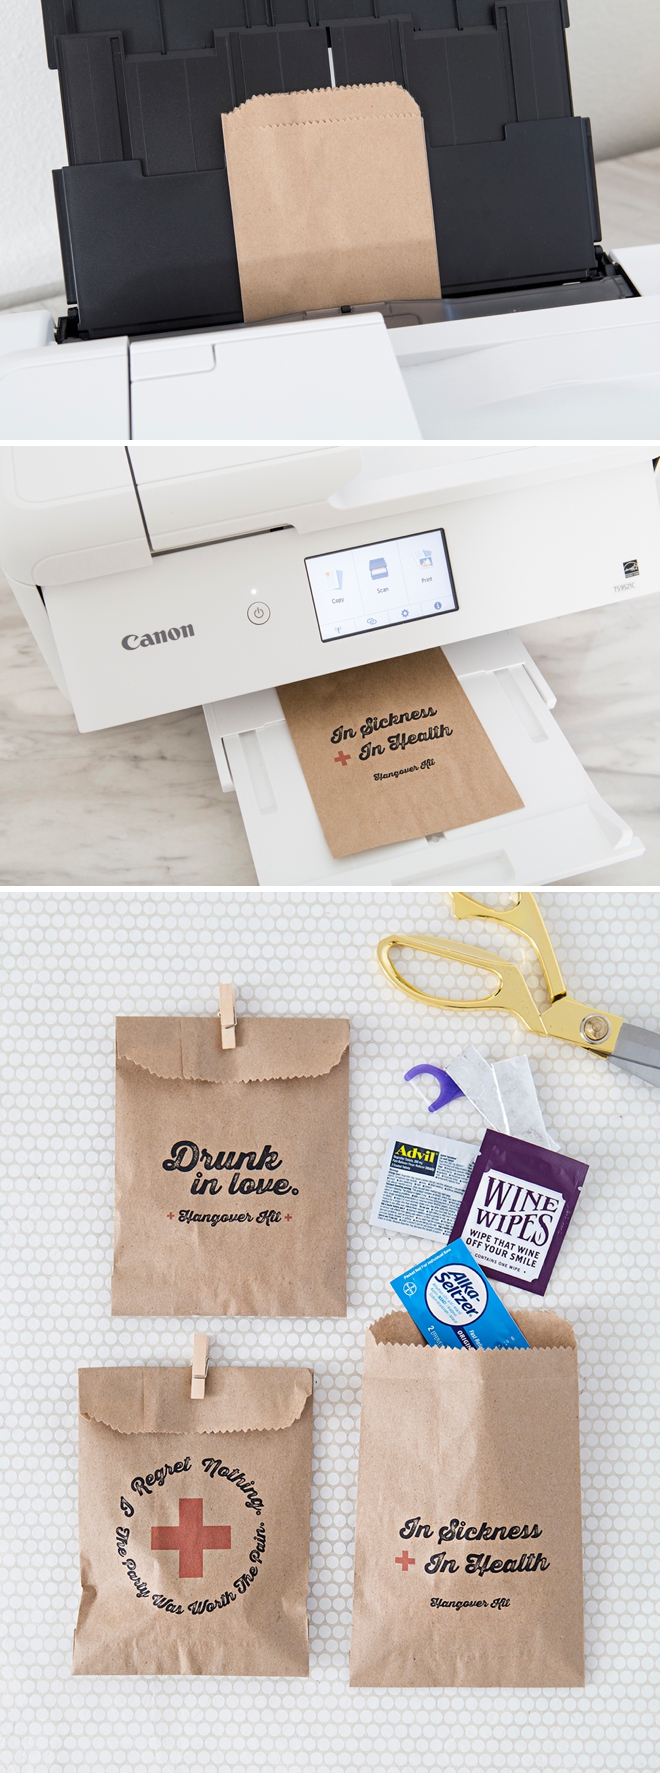 How to print your own hangover kit bags!